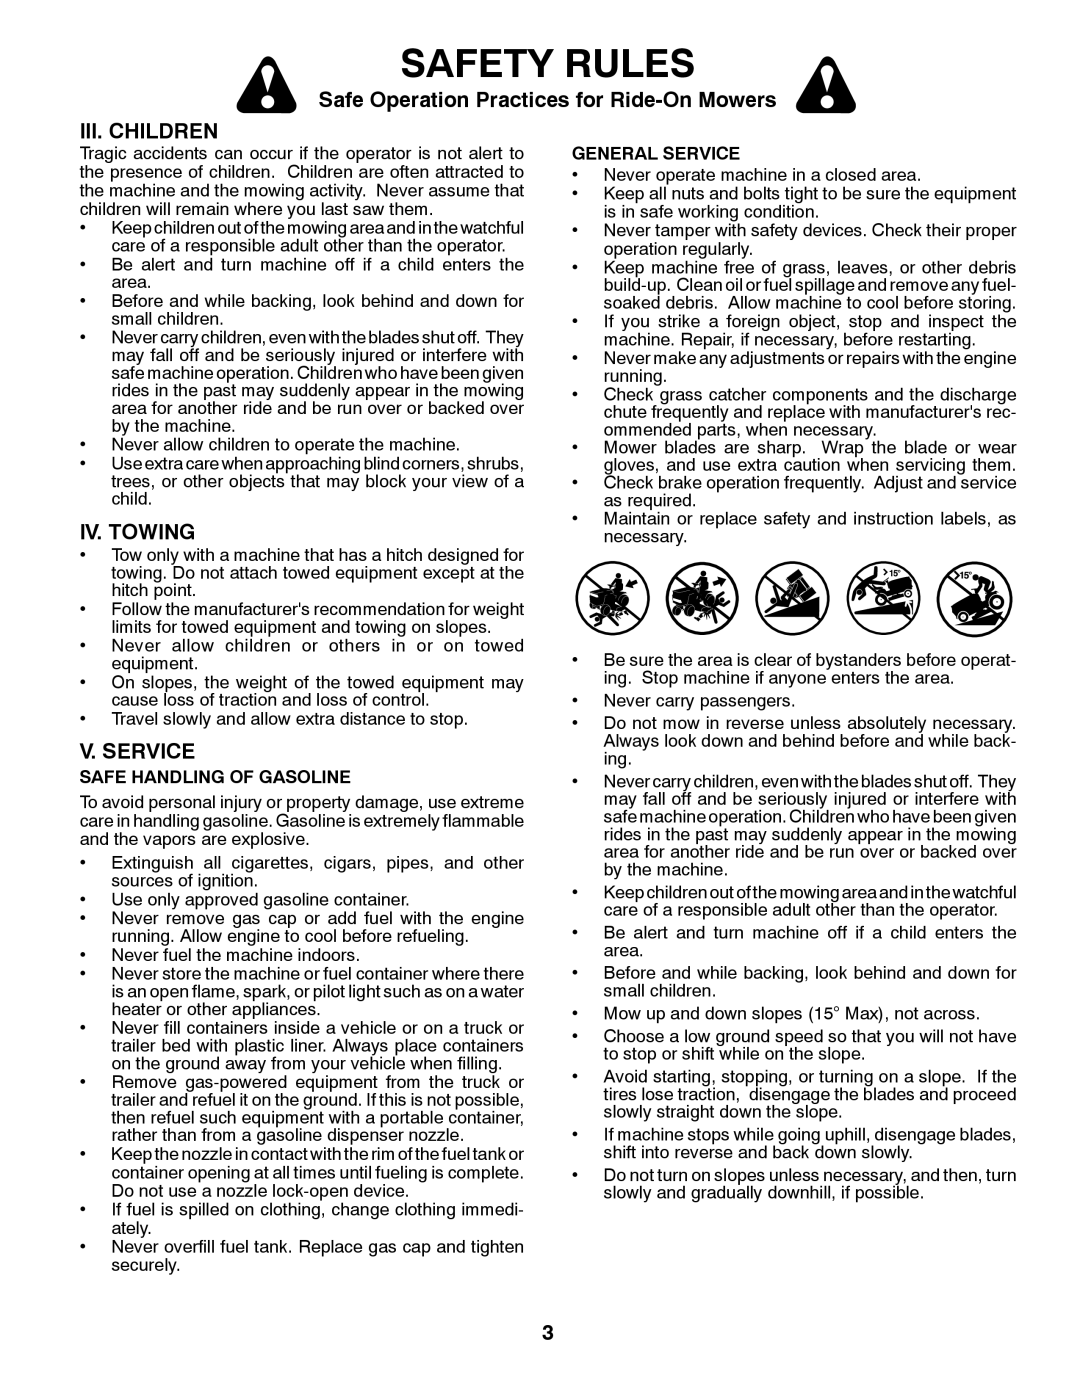 Husqvarna 532 43 65-03 Iii. Children, Iv. Towing, V. Service, Safety Rules, Safe Operation Practices for Ride-On Mowers 